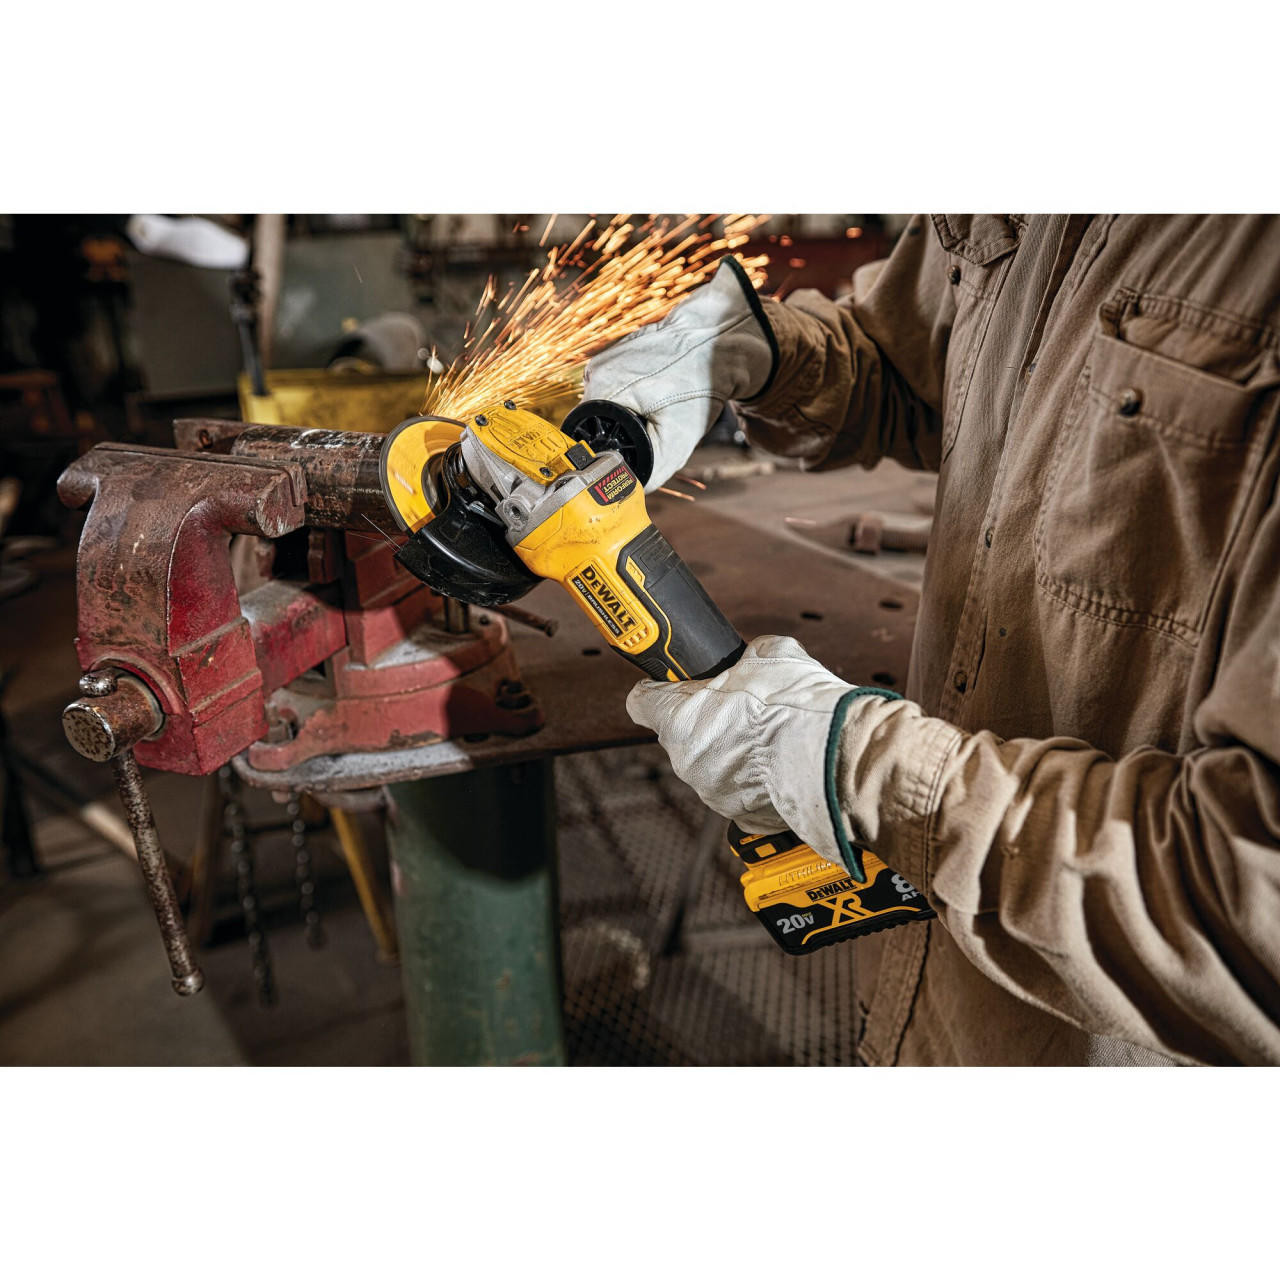 Dewalt DEWALT 20V MAX XR Brushless Cordless 4-1/2 - 5 in. Switch Small Angle Grinder with POWER DETECT Tool Technology Kit DCG415W1 